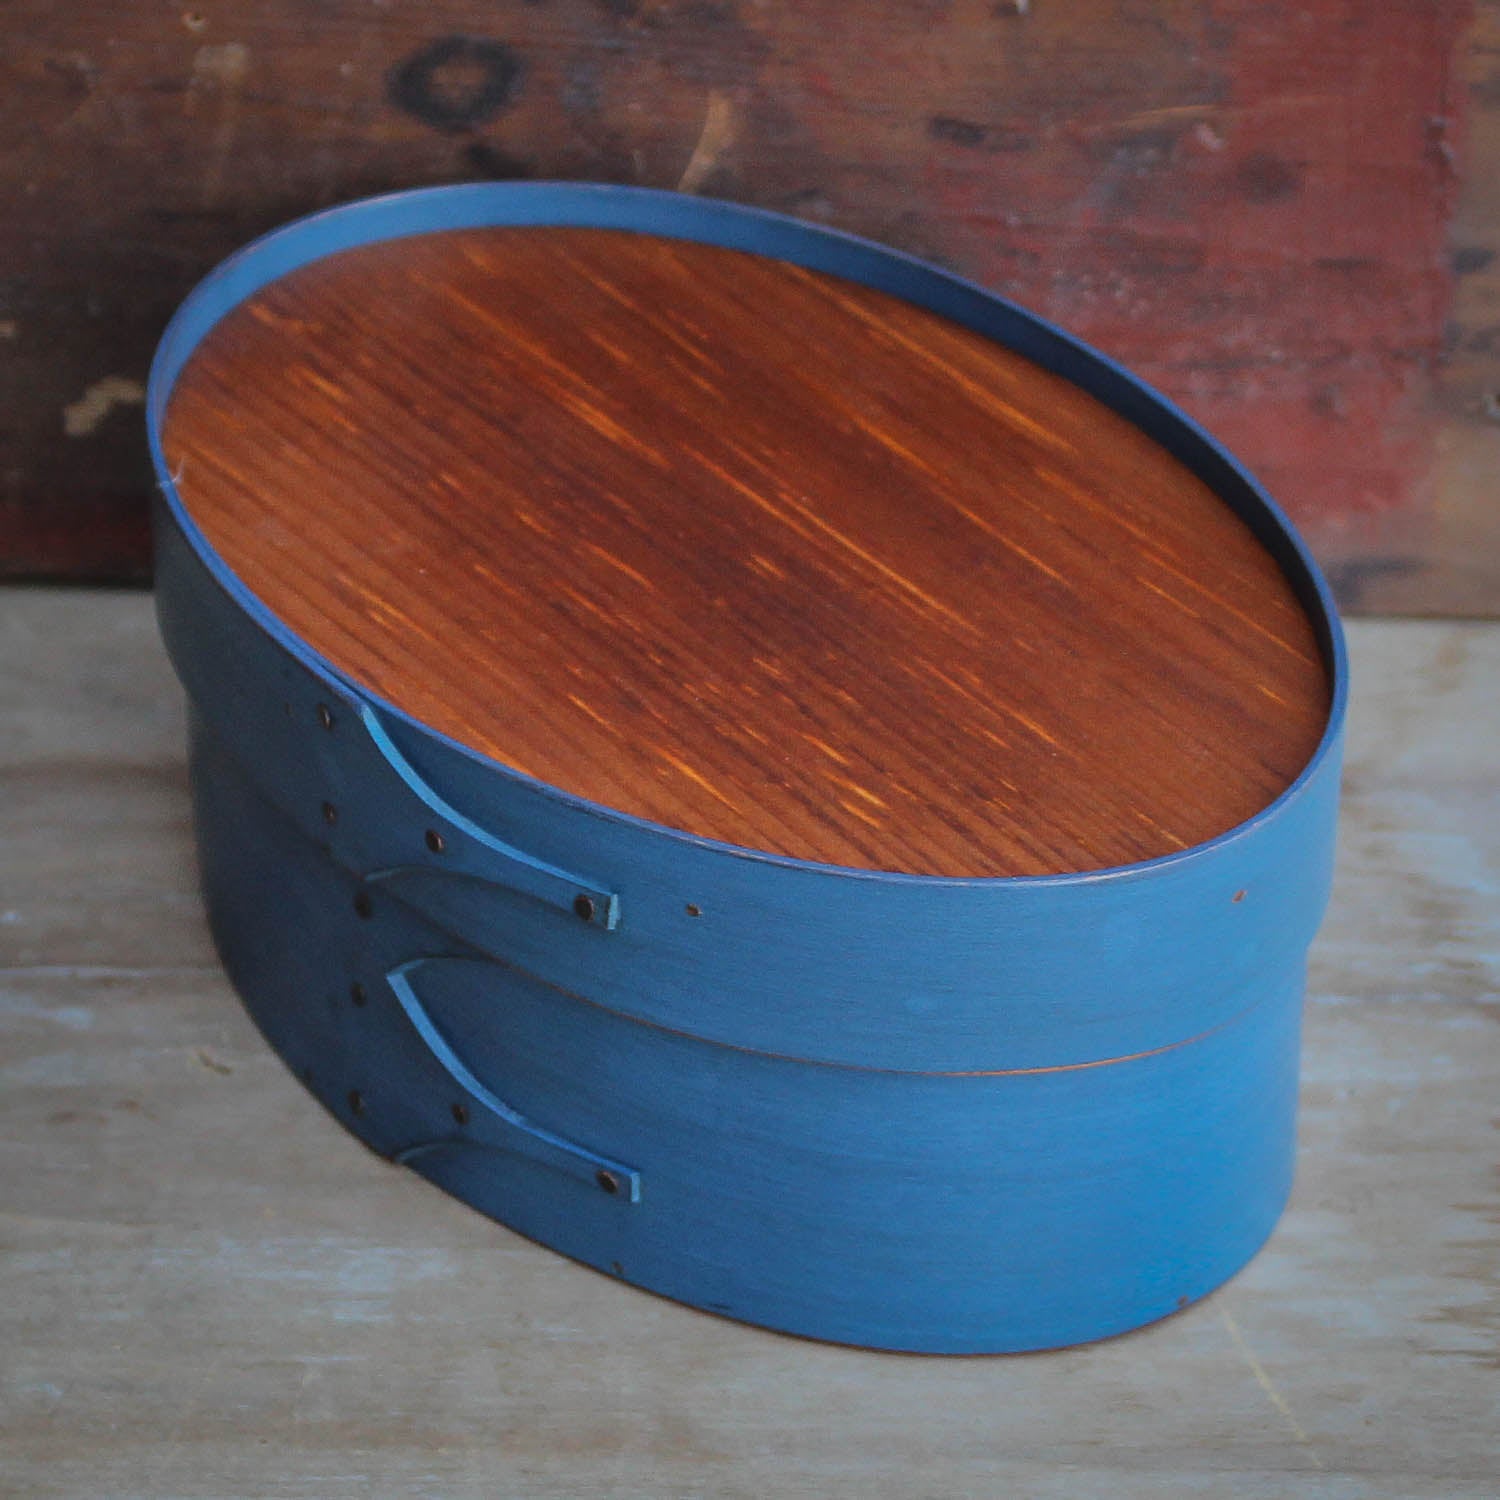 Shaker Oval Box with Recessed Lid for Needlework, Size #3, LeHays Shaker Boxes, Blue Milk Paint Finish, Side View